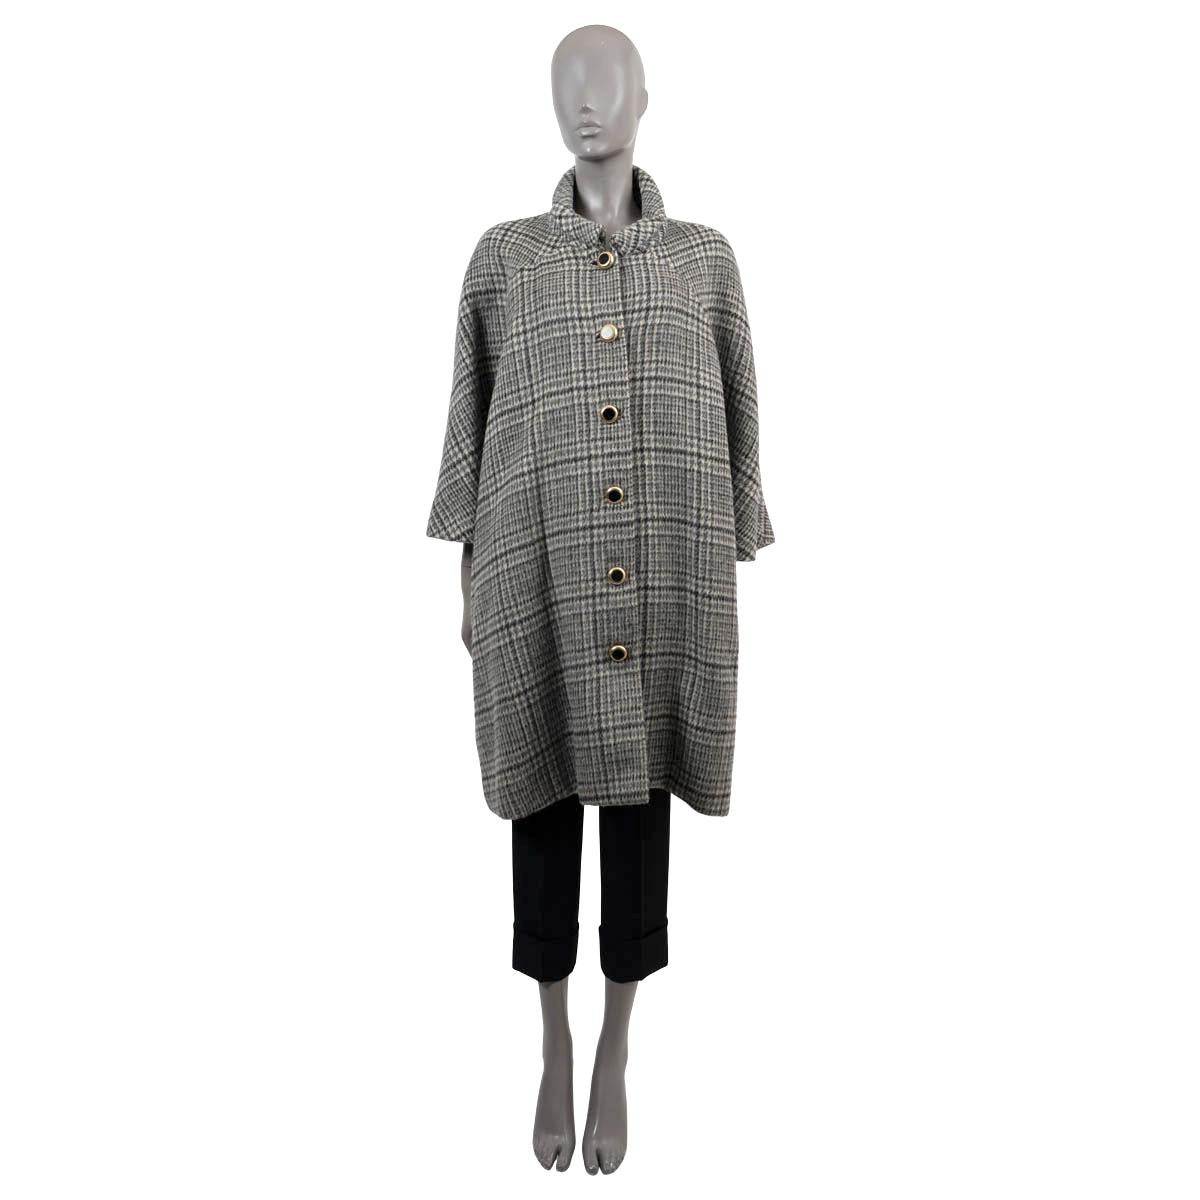 100% authentic Balenciaga plaid coat in cream, grey and black wool (60%) and mohair (40%). Features an oversized silhouette, two slit pockets at the waist and 7/8 raglan sleeves (sleeve measurement taken from the neck). Opens with gold-tone and